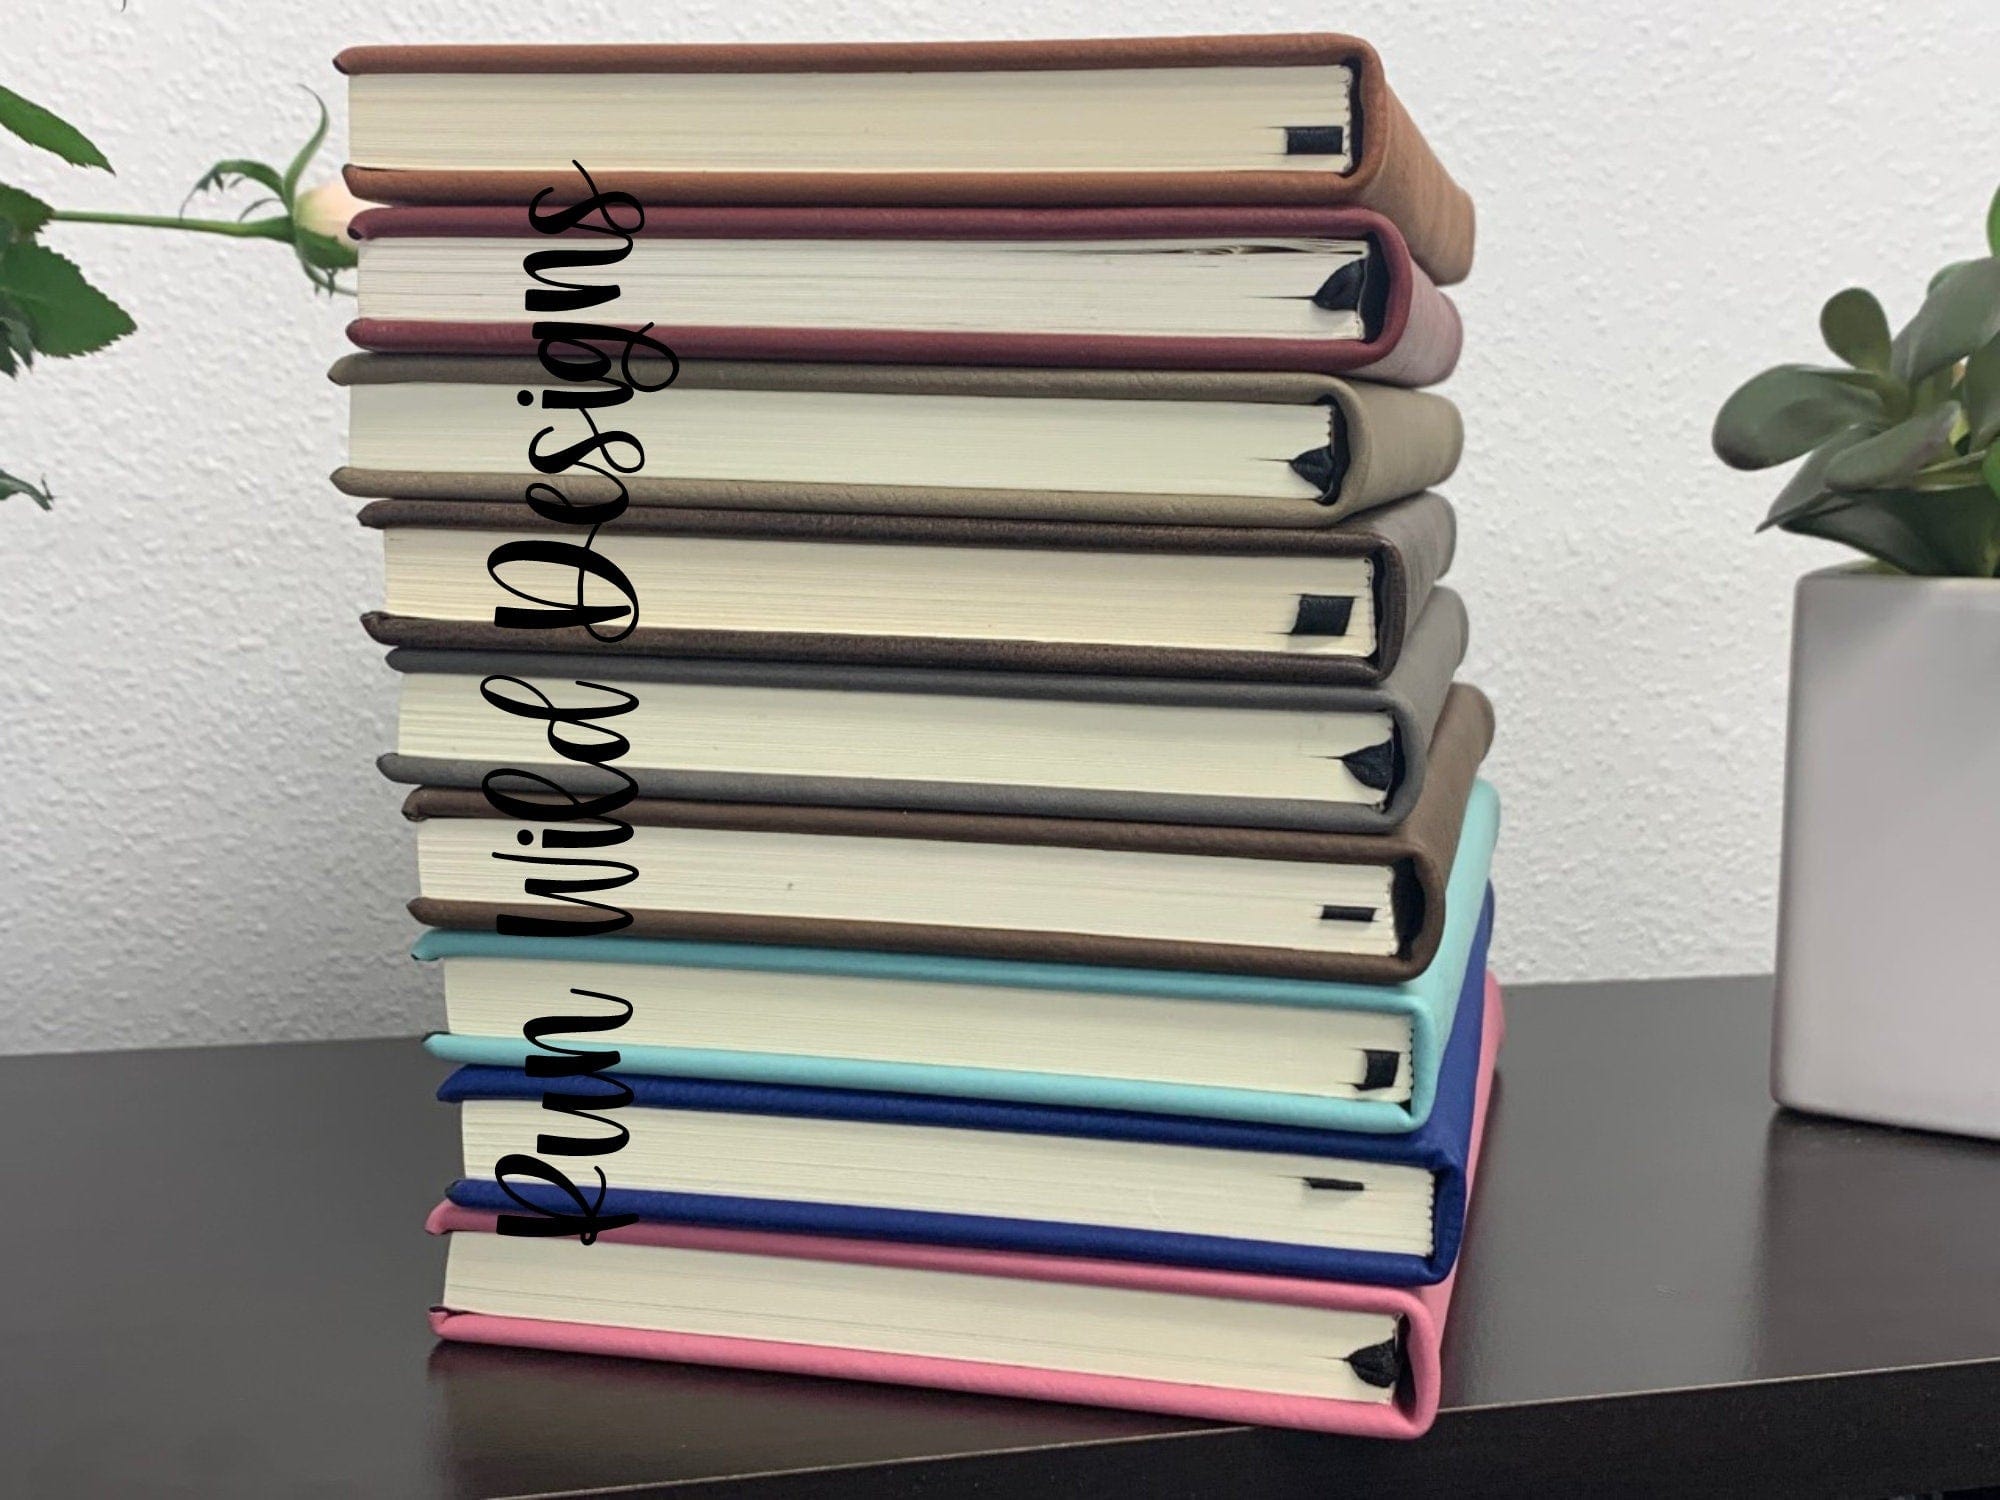 Leatherette journal Leatherette Journal Name Personalized Leatherette Journal With Flower Design